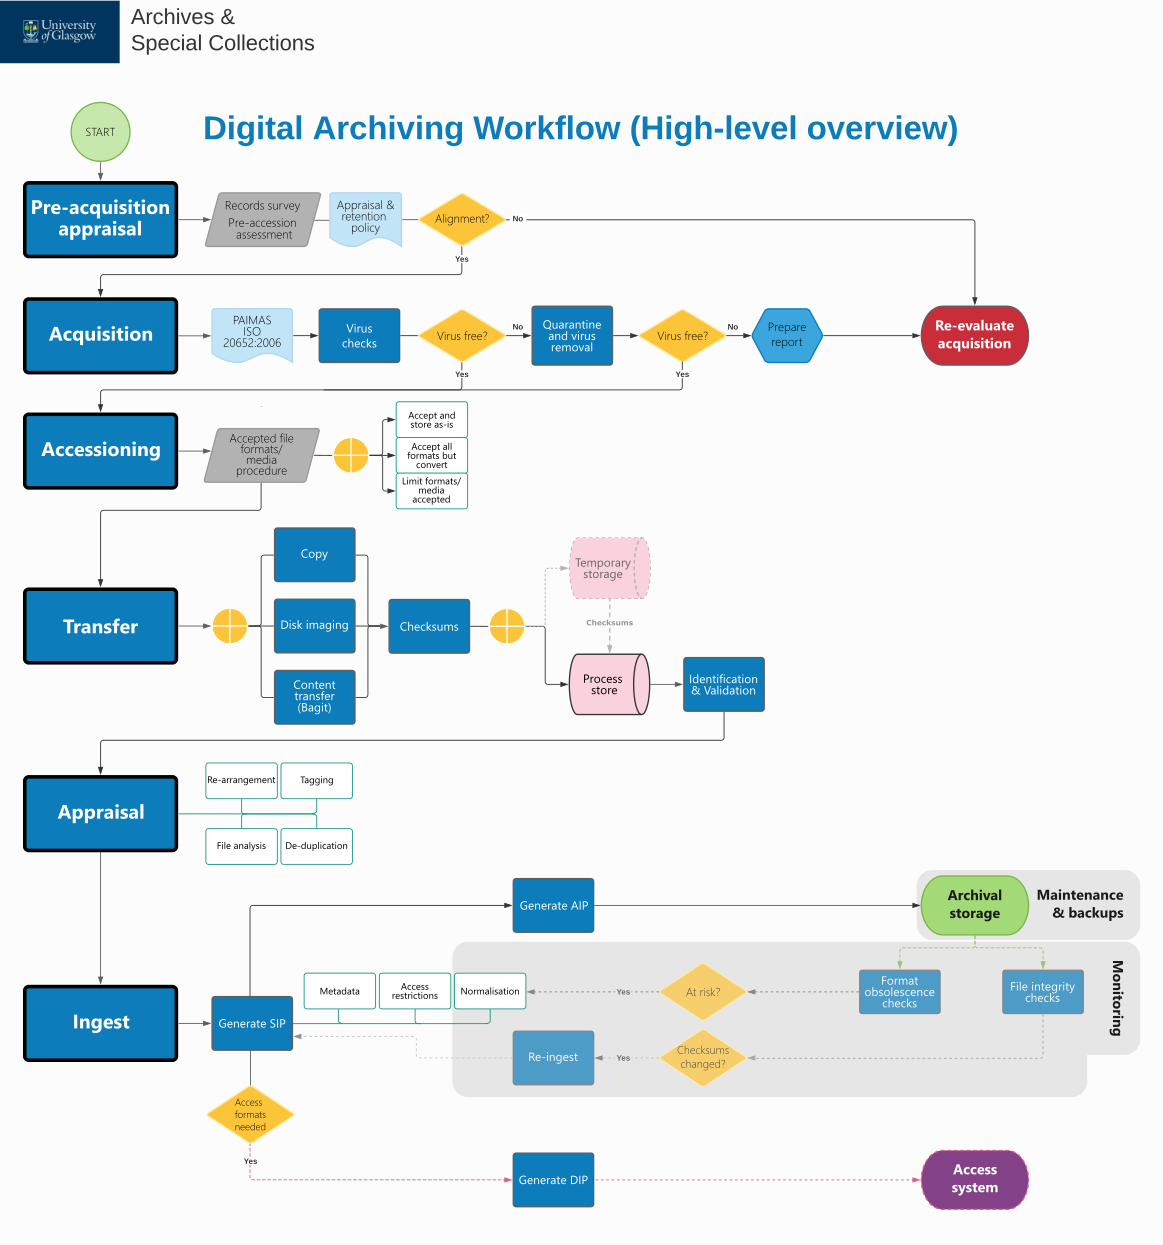 Digital archiving workflow (high level, overview) produced by Archives and Special Collections at the University of Glasgow.